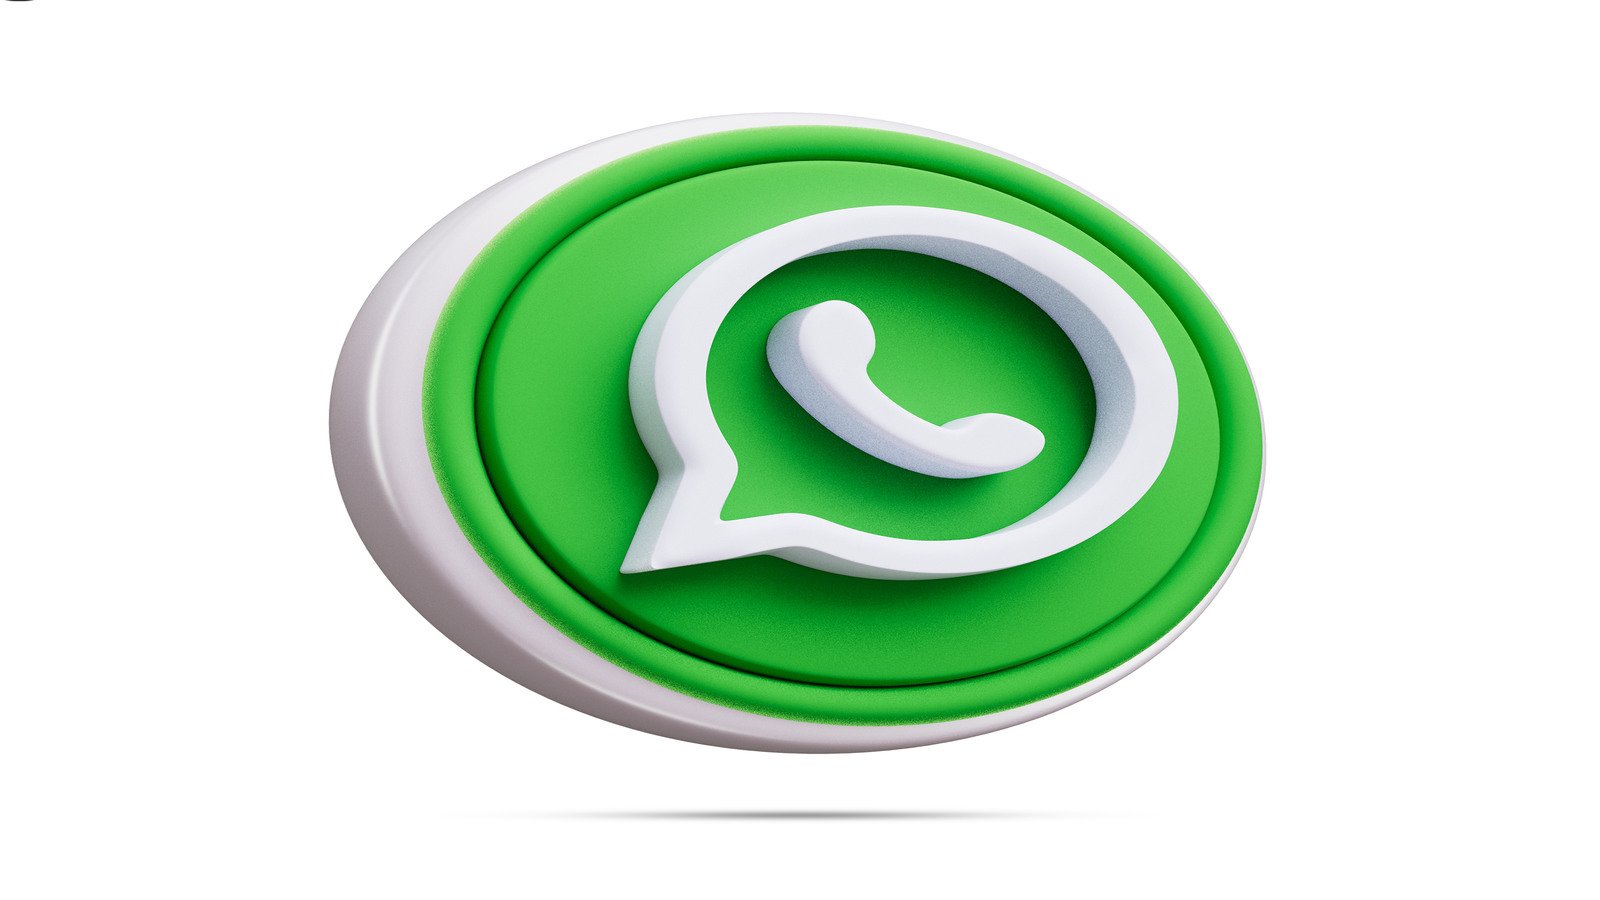 m013t0007 a social media whats app icon 30may23 1600x900 1